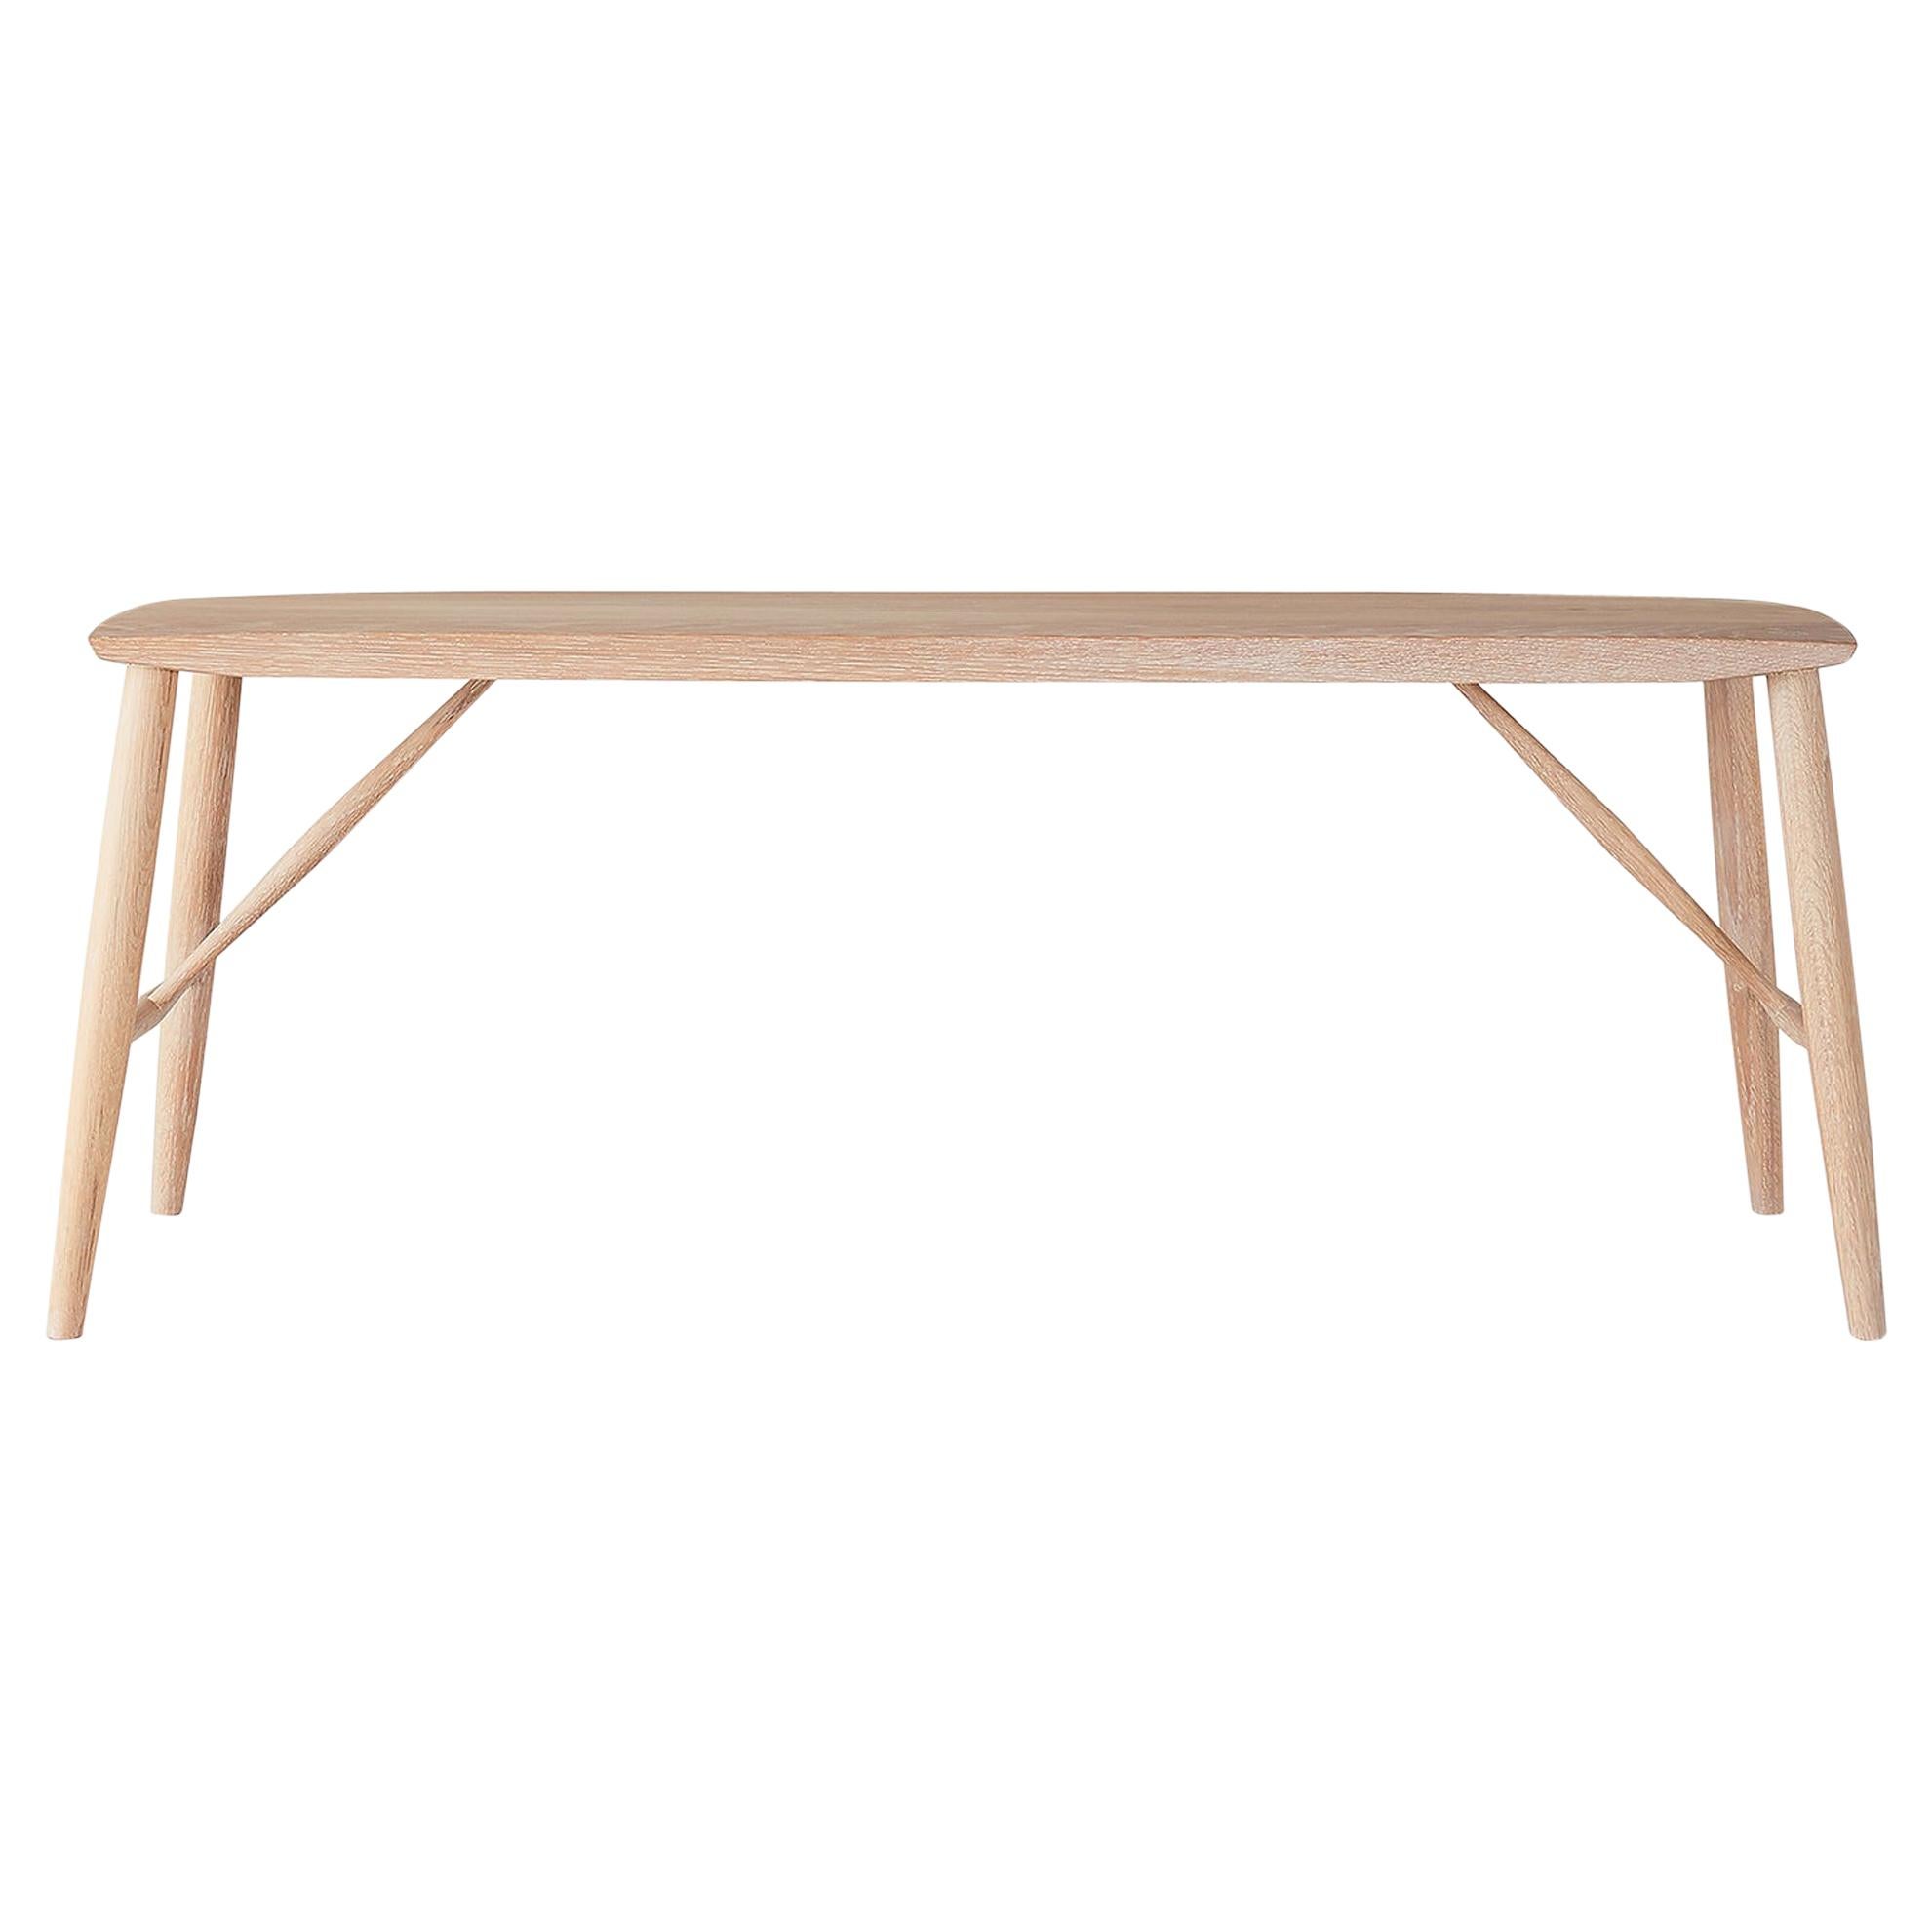 Minimal White Oak Bench by Coolican & Company